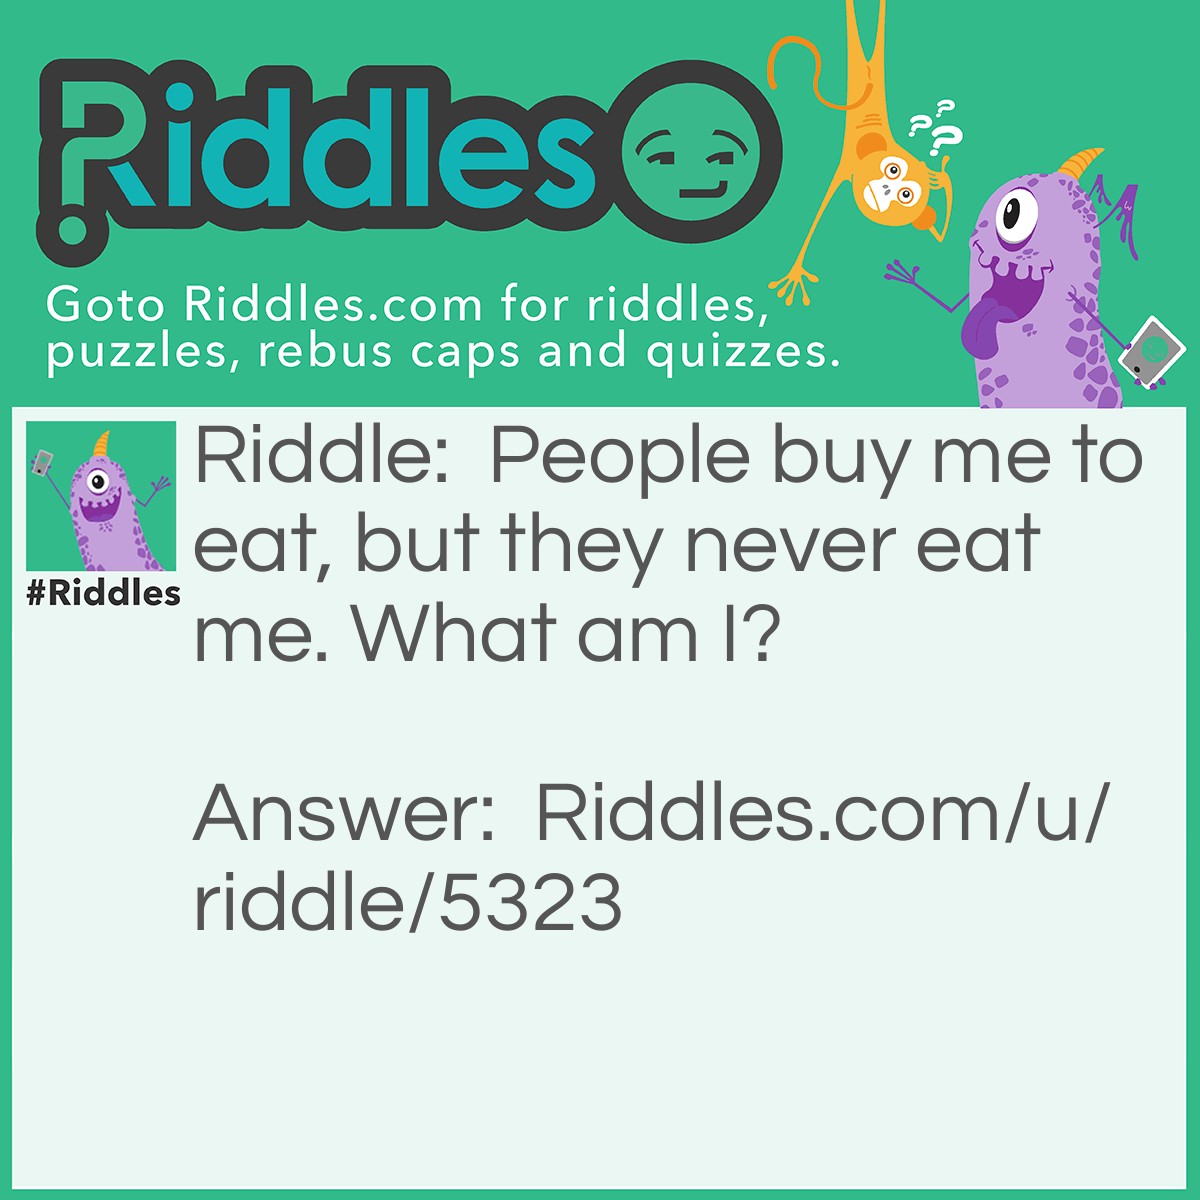 Riddle: People buy me to eat, but they never eat me. What am I? Answer: A plate!